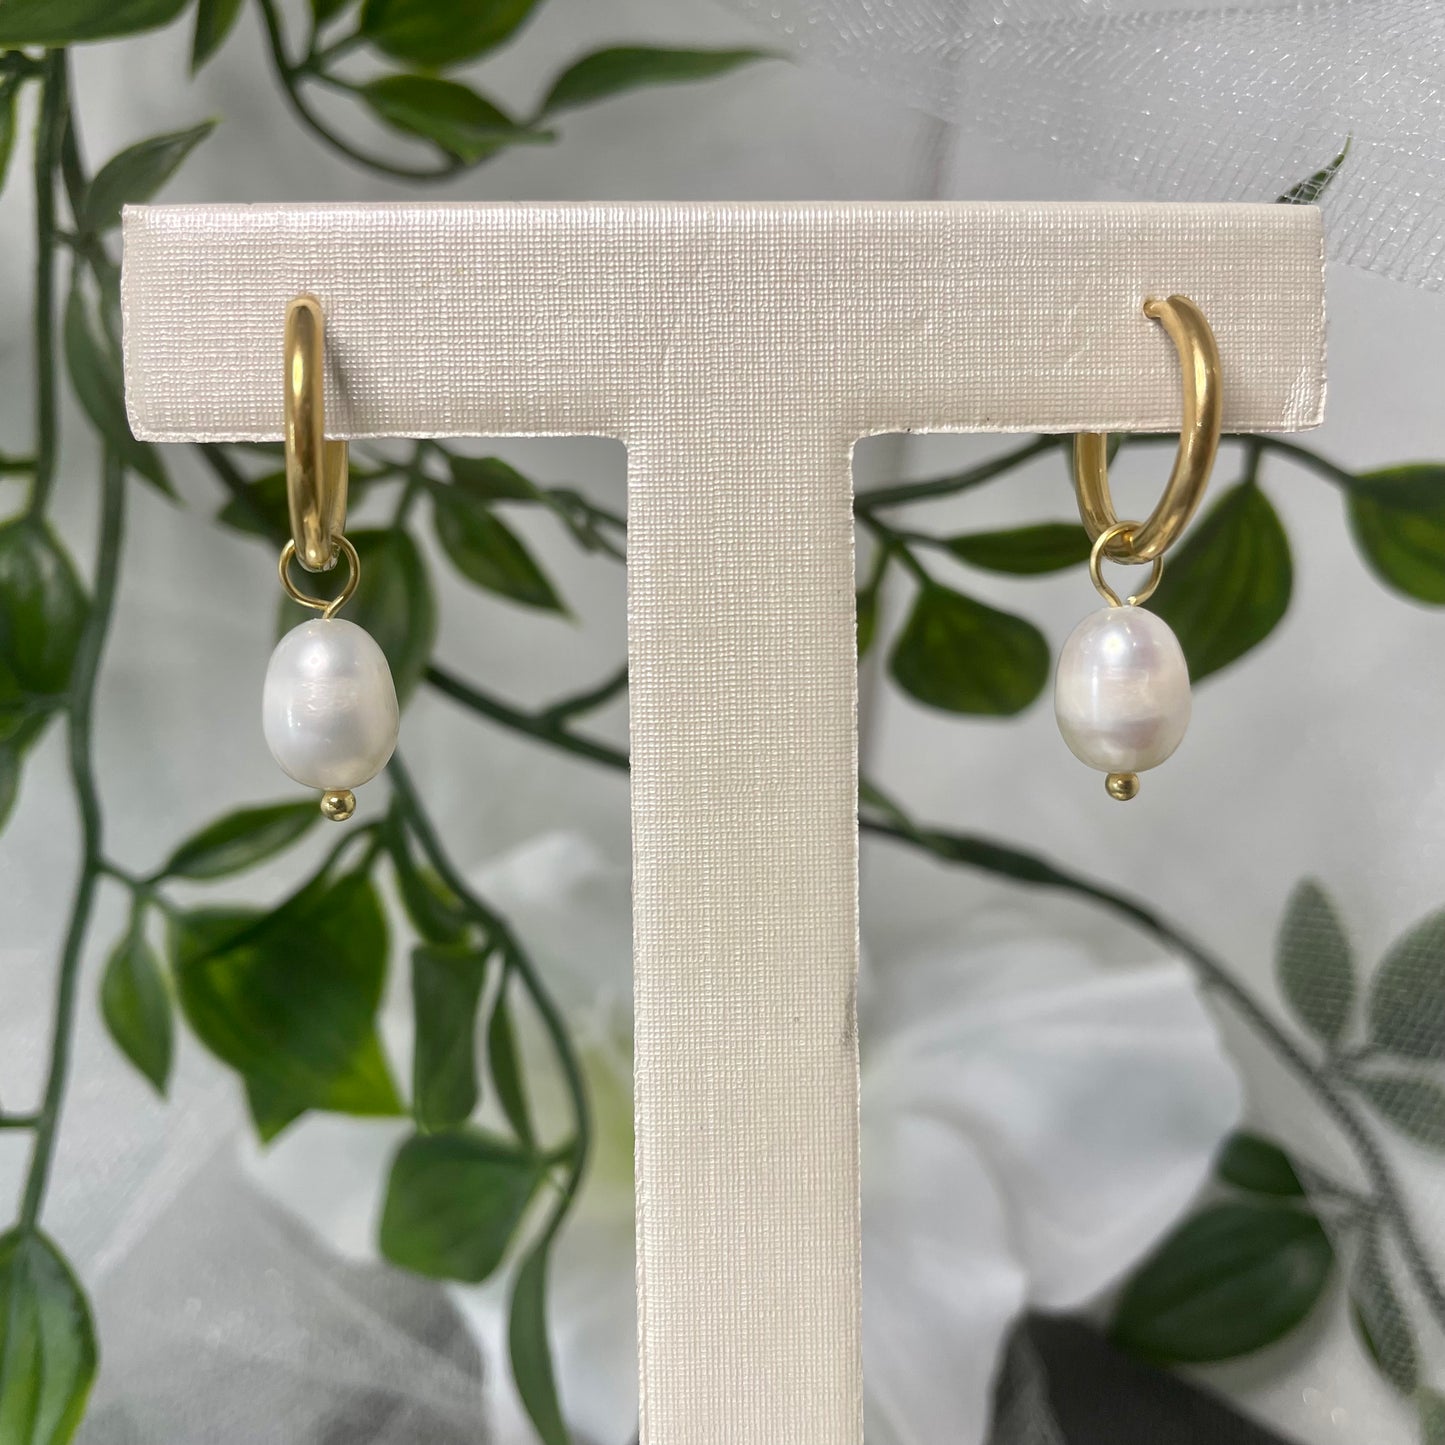 Armani Gold Freshwater Pearl bridal earrings with CZ embellishment from Divine Bridal.